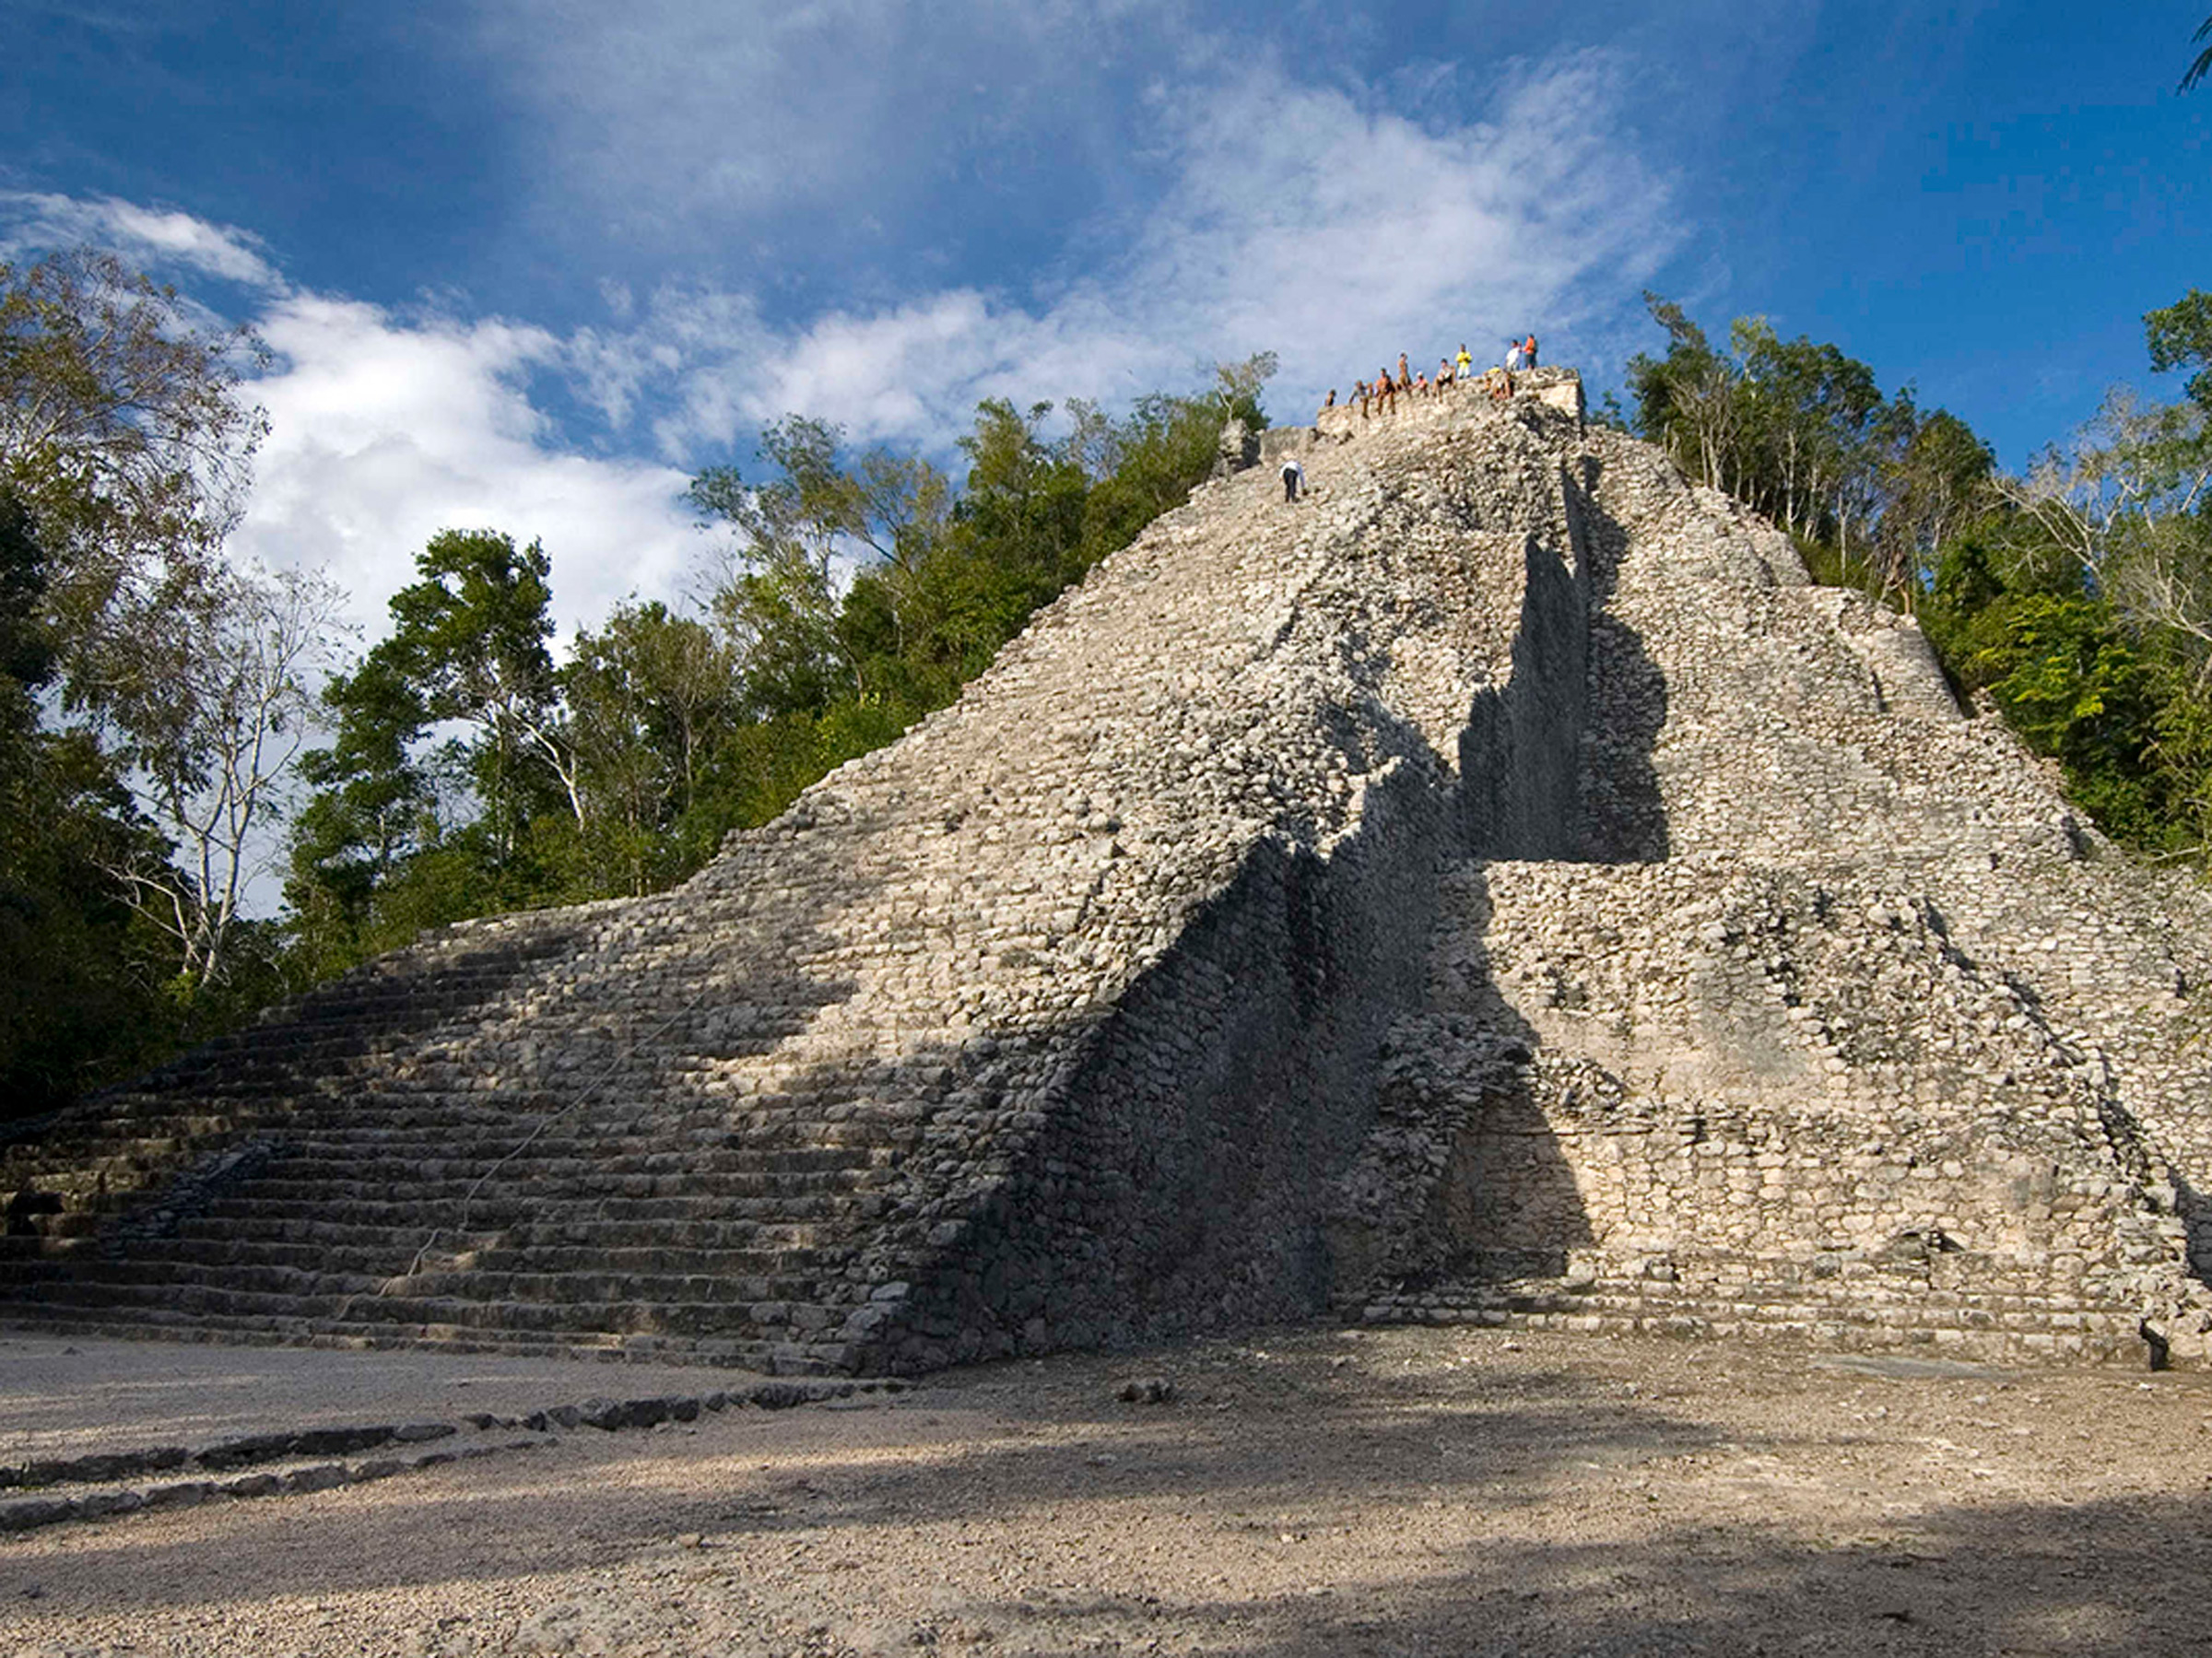 The archaeological site of Coba